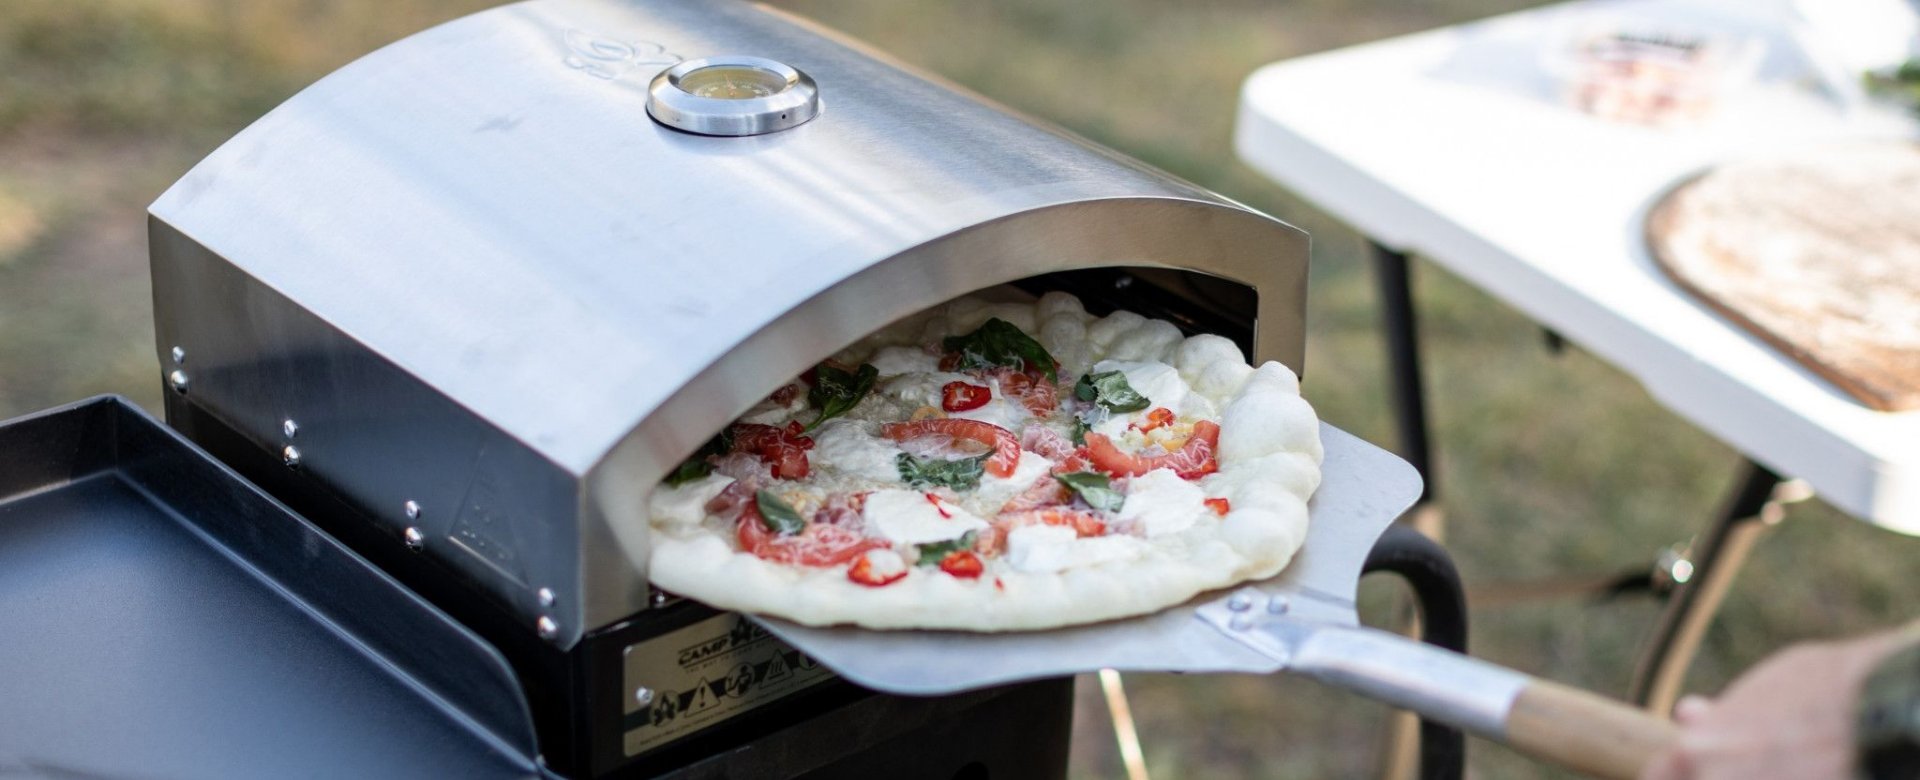 How To Use Pizza Oven How to Use Your Outdoor Pizza Oven Like a Pro